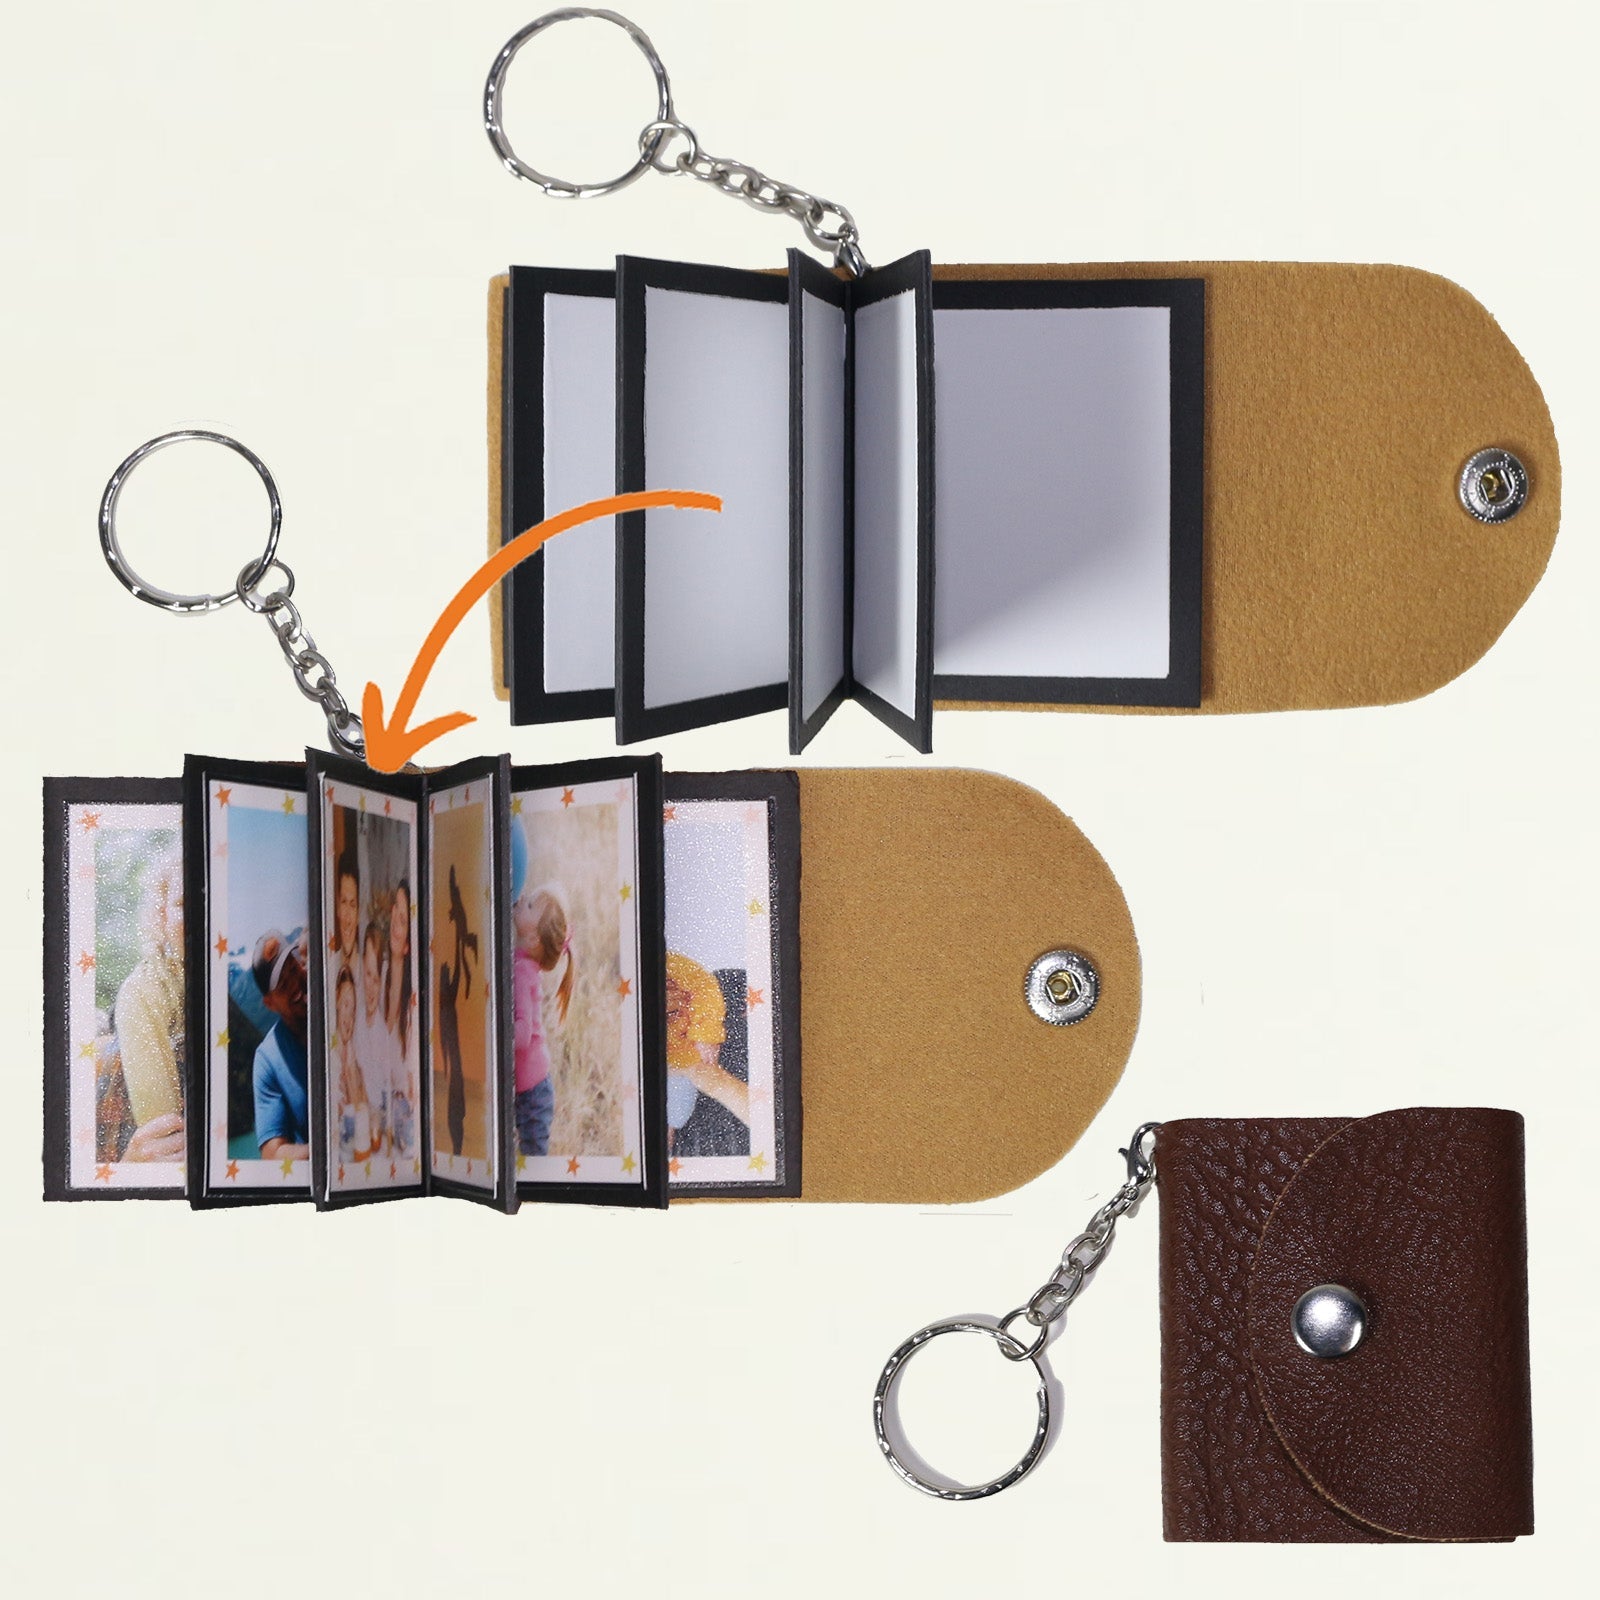 Mini Book Photo Album Leather Keychain - Personalized Gifts for